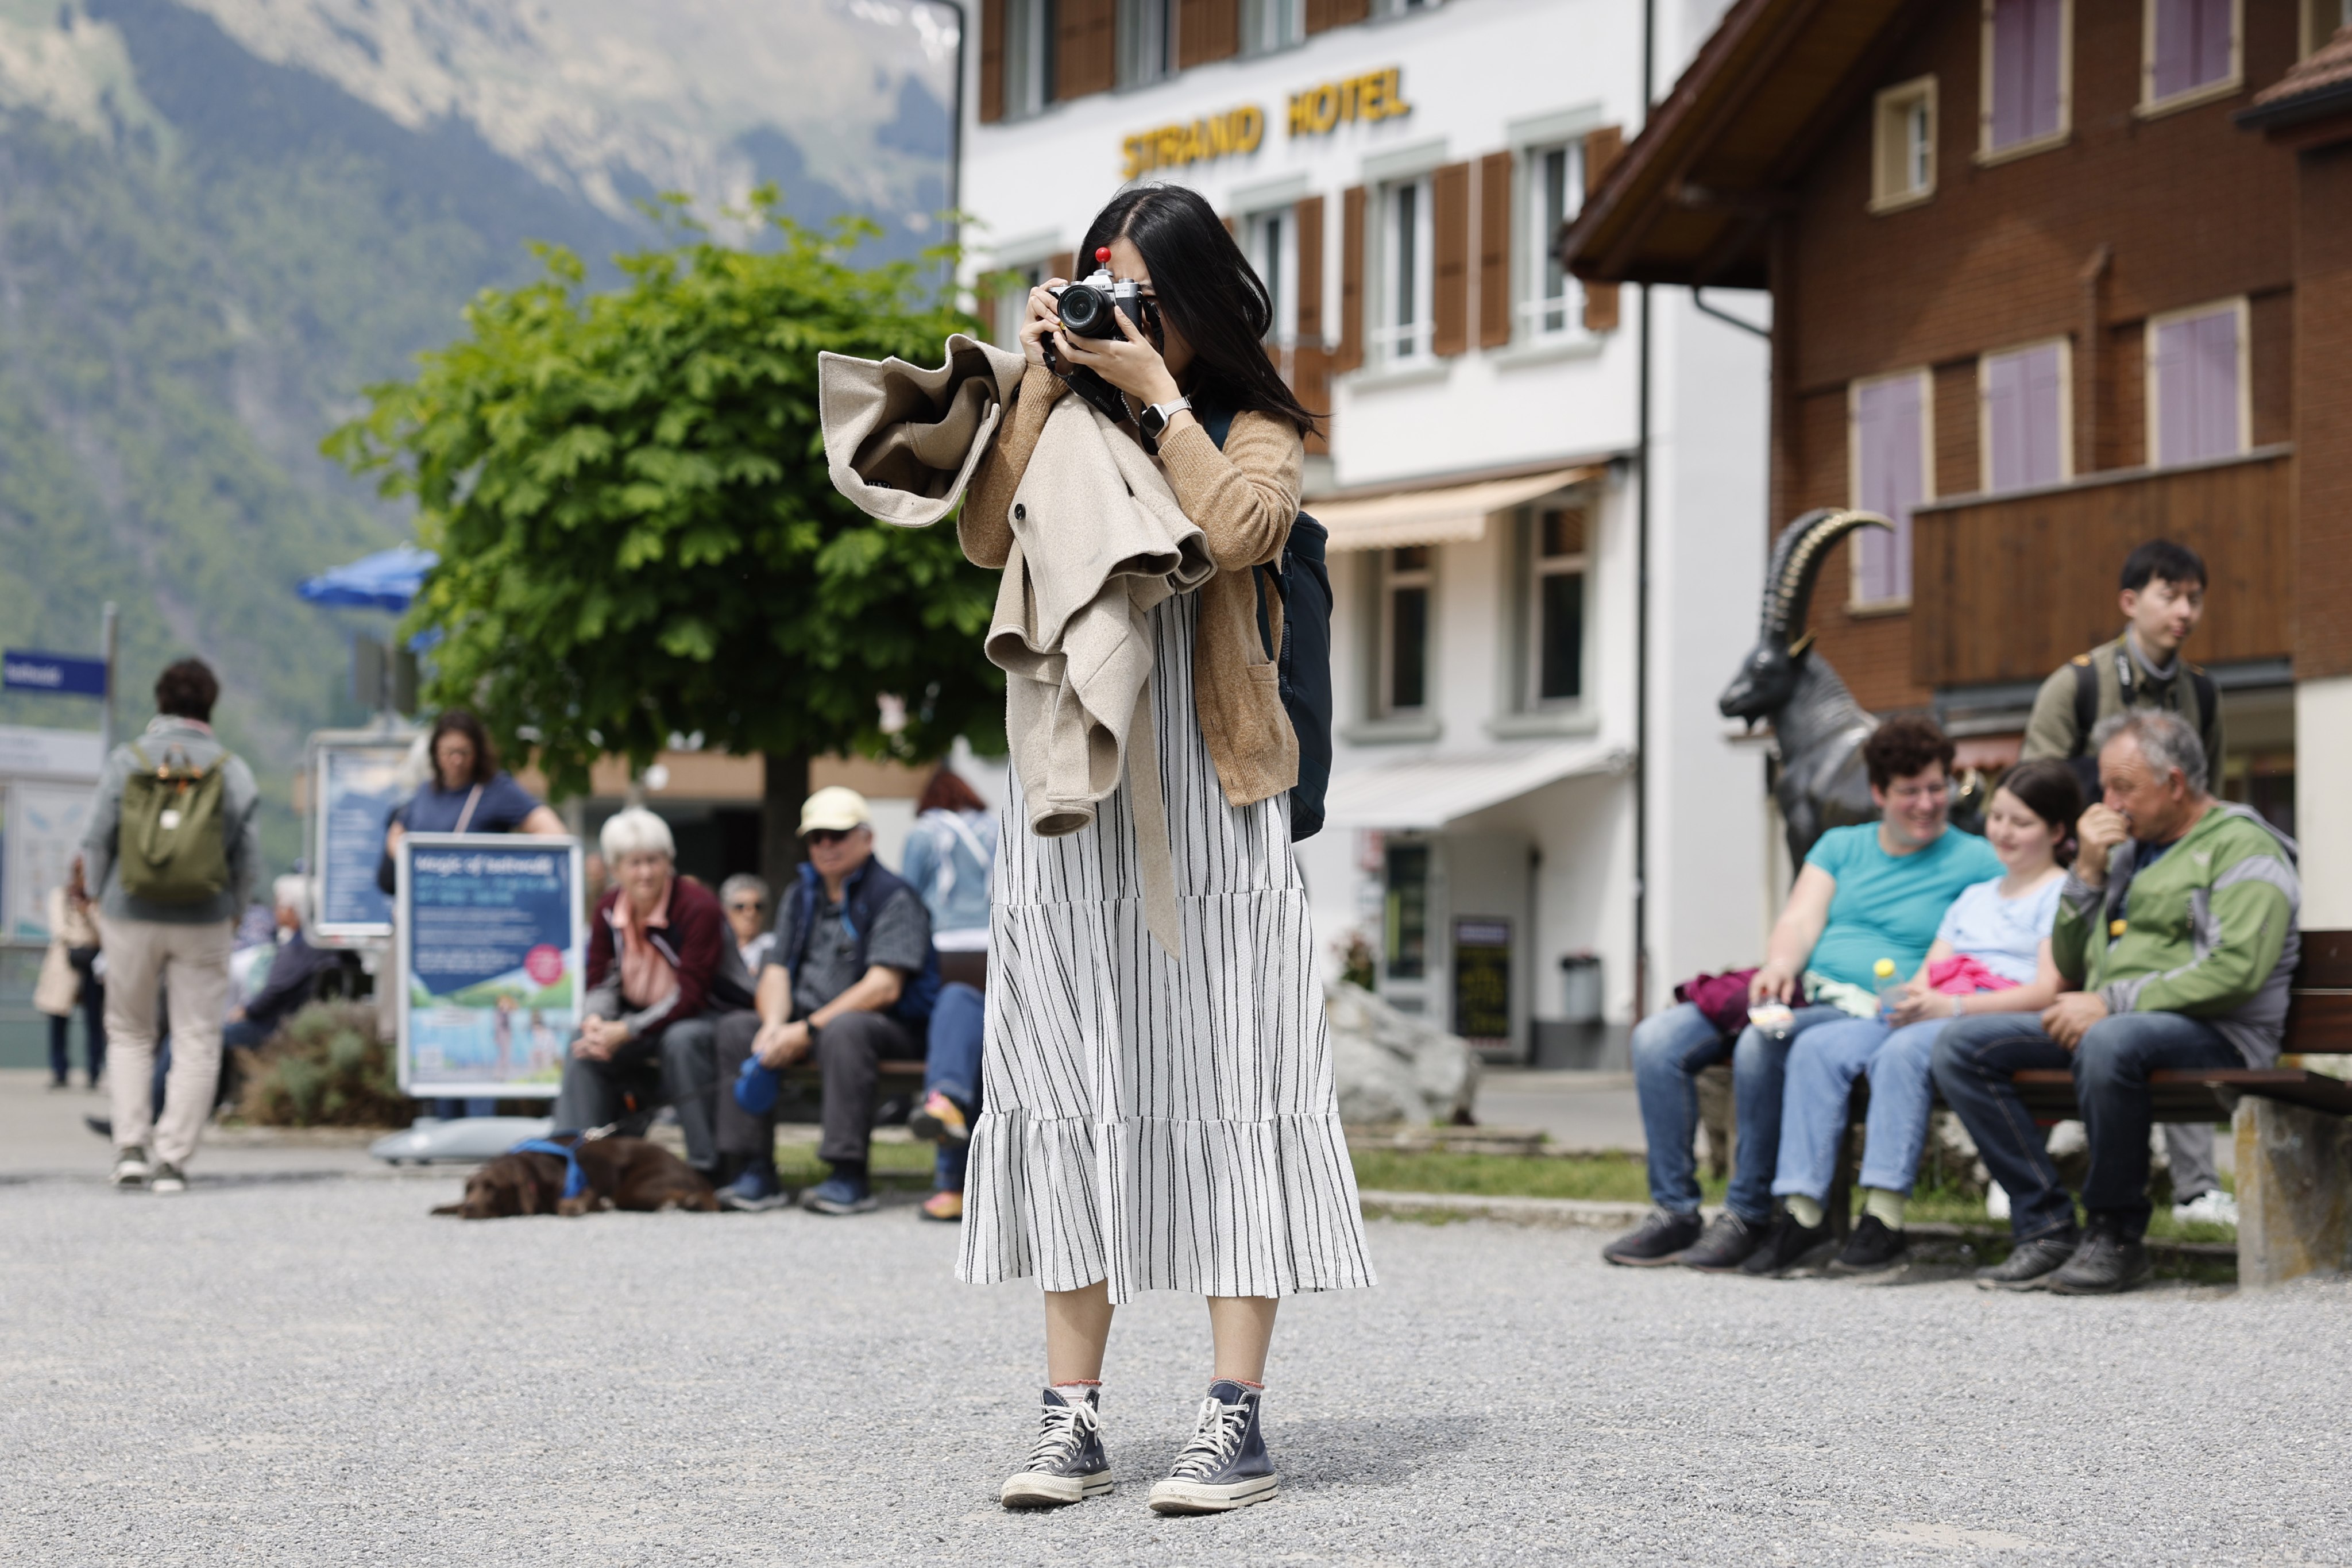 A Korean visitor takes pictures in Iseltwald, Switzerland. Photo: EPA